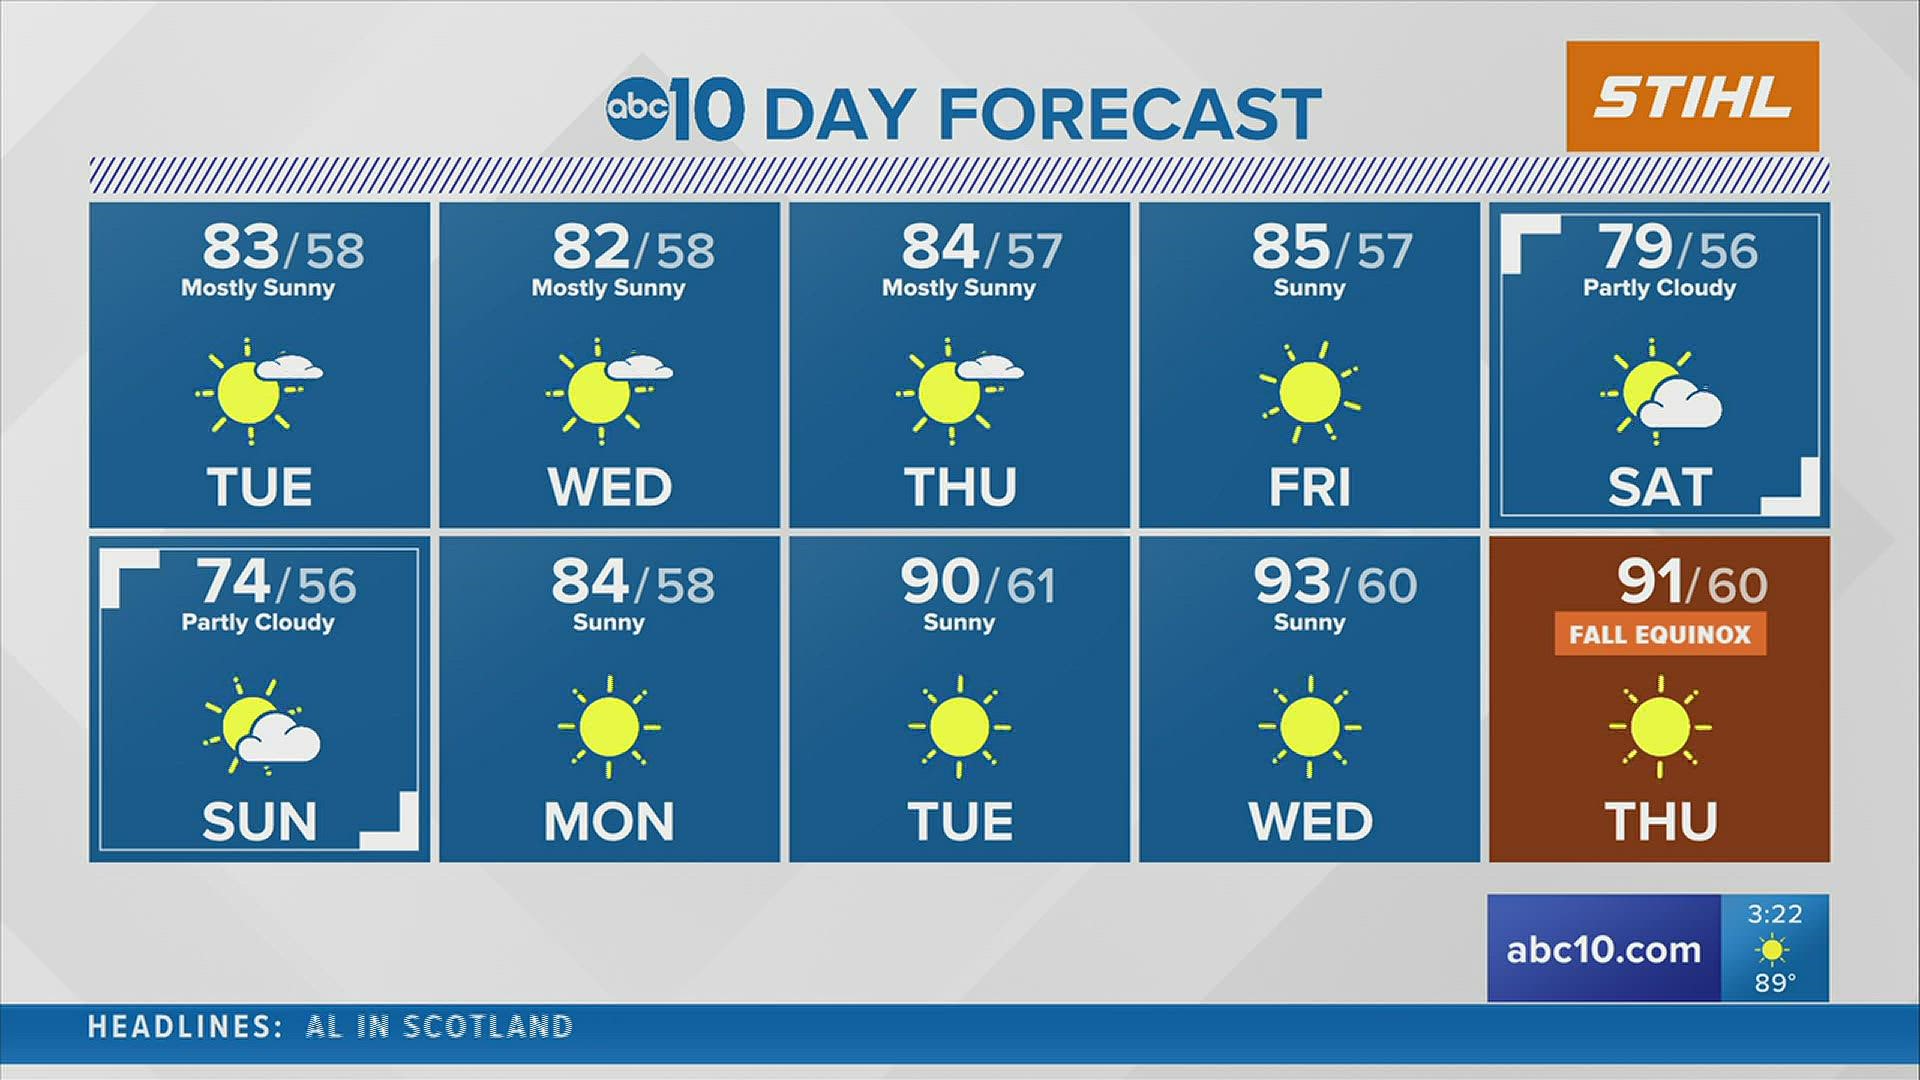 ABC10 Meteorologist Brenden Mincheff tells us what to expect for the next 10 days of weather